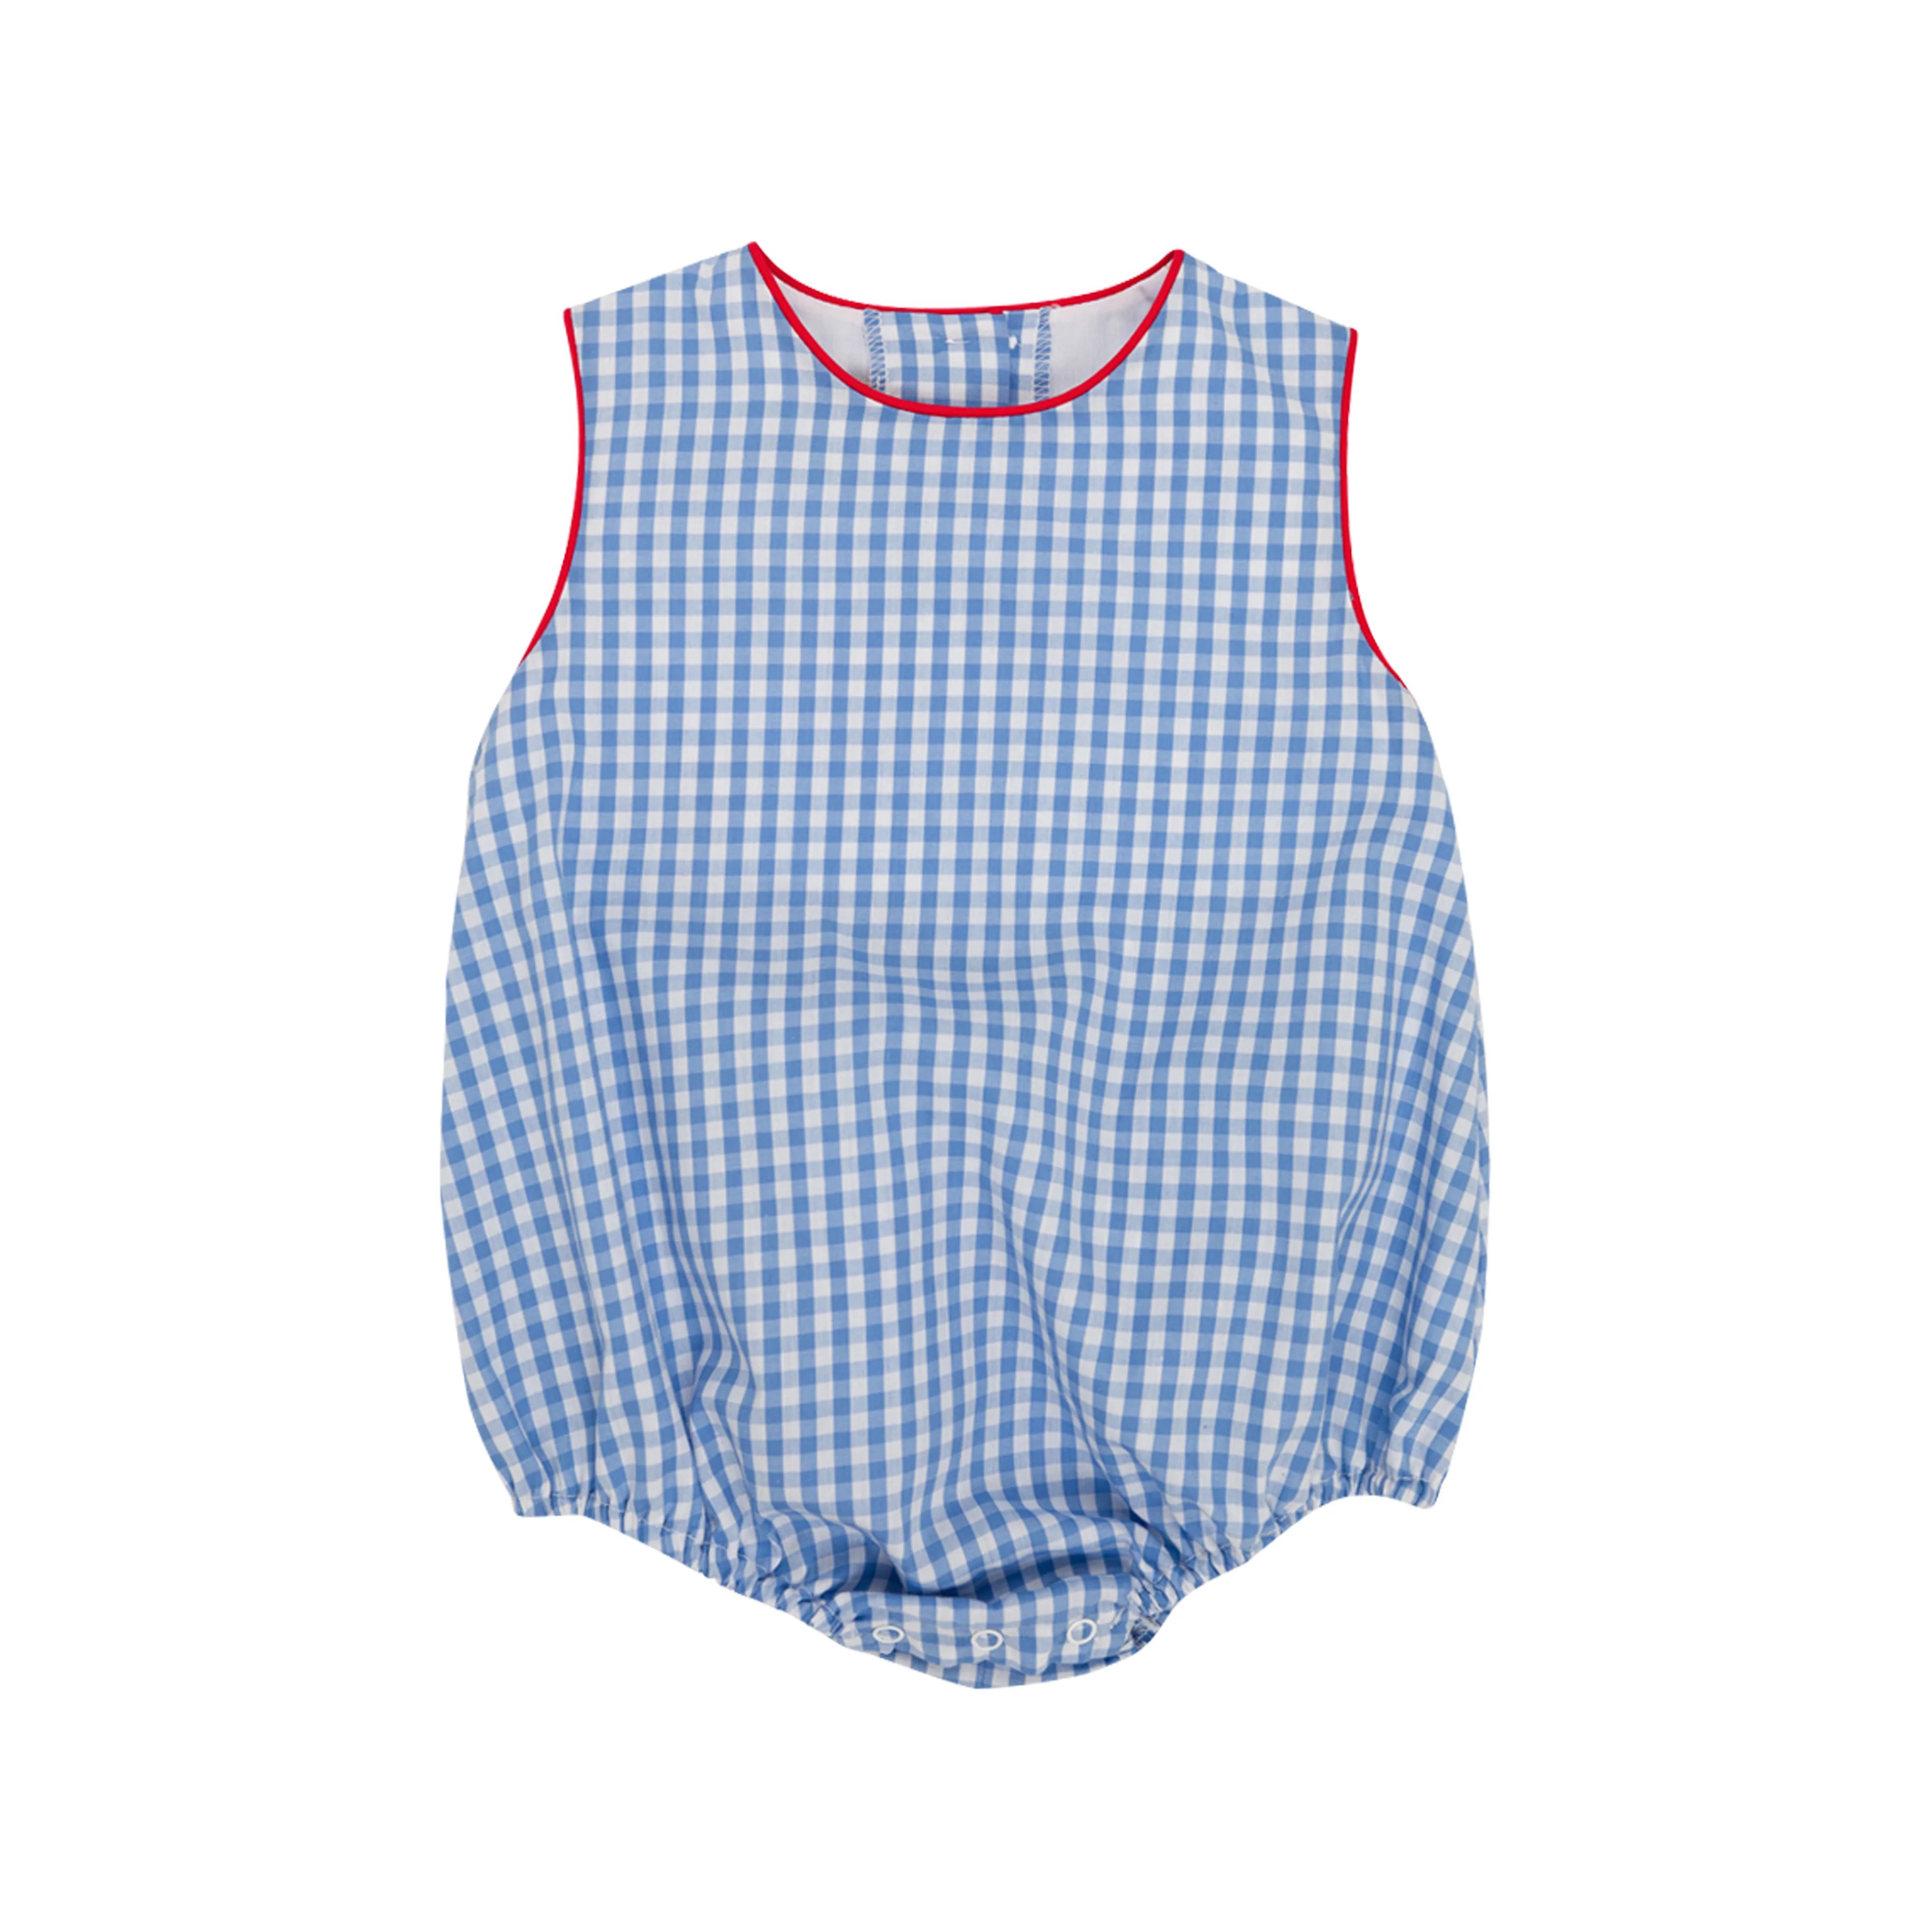 Benjamin Bubble - Park City Periwinkle Check with Richmond Red | The Beaufort Bonnet Company